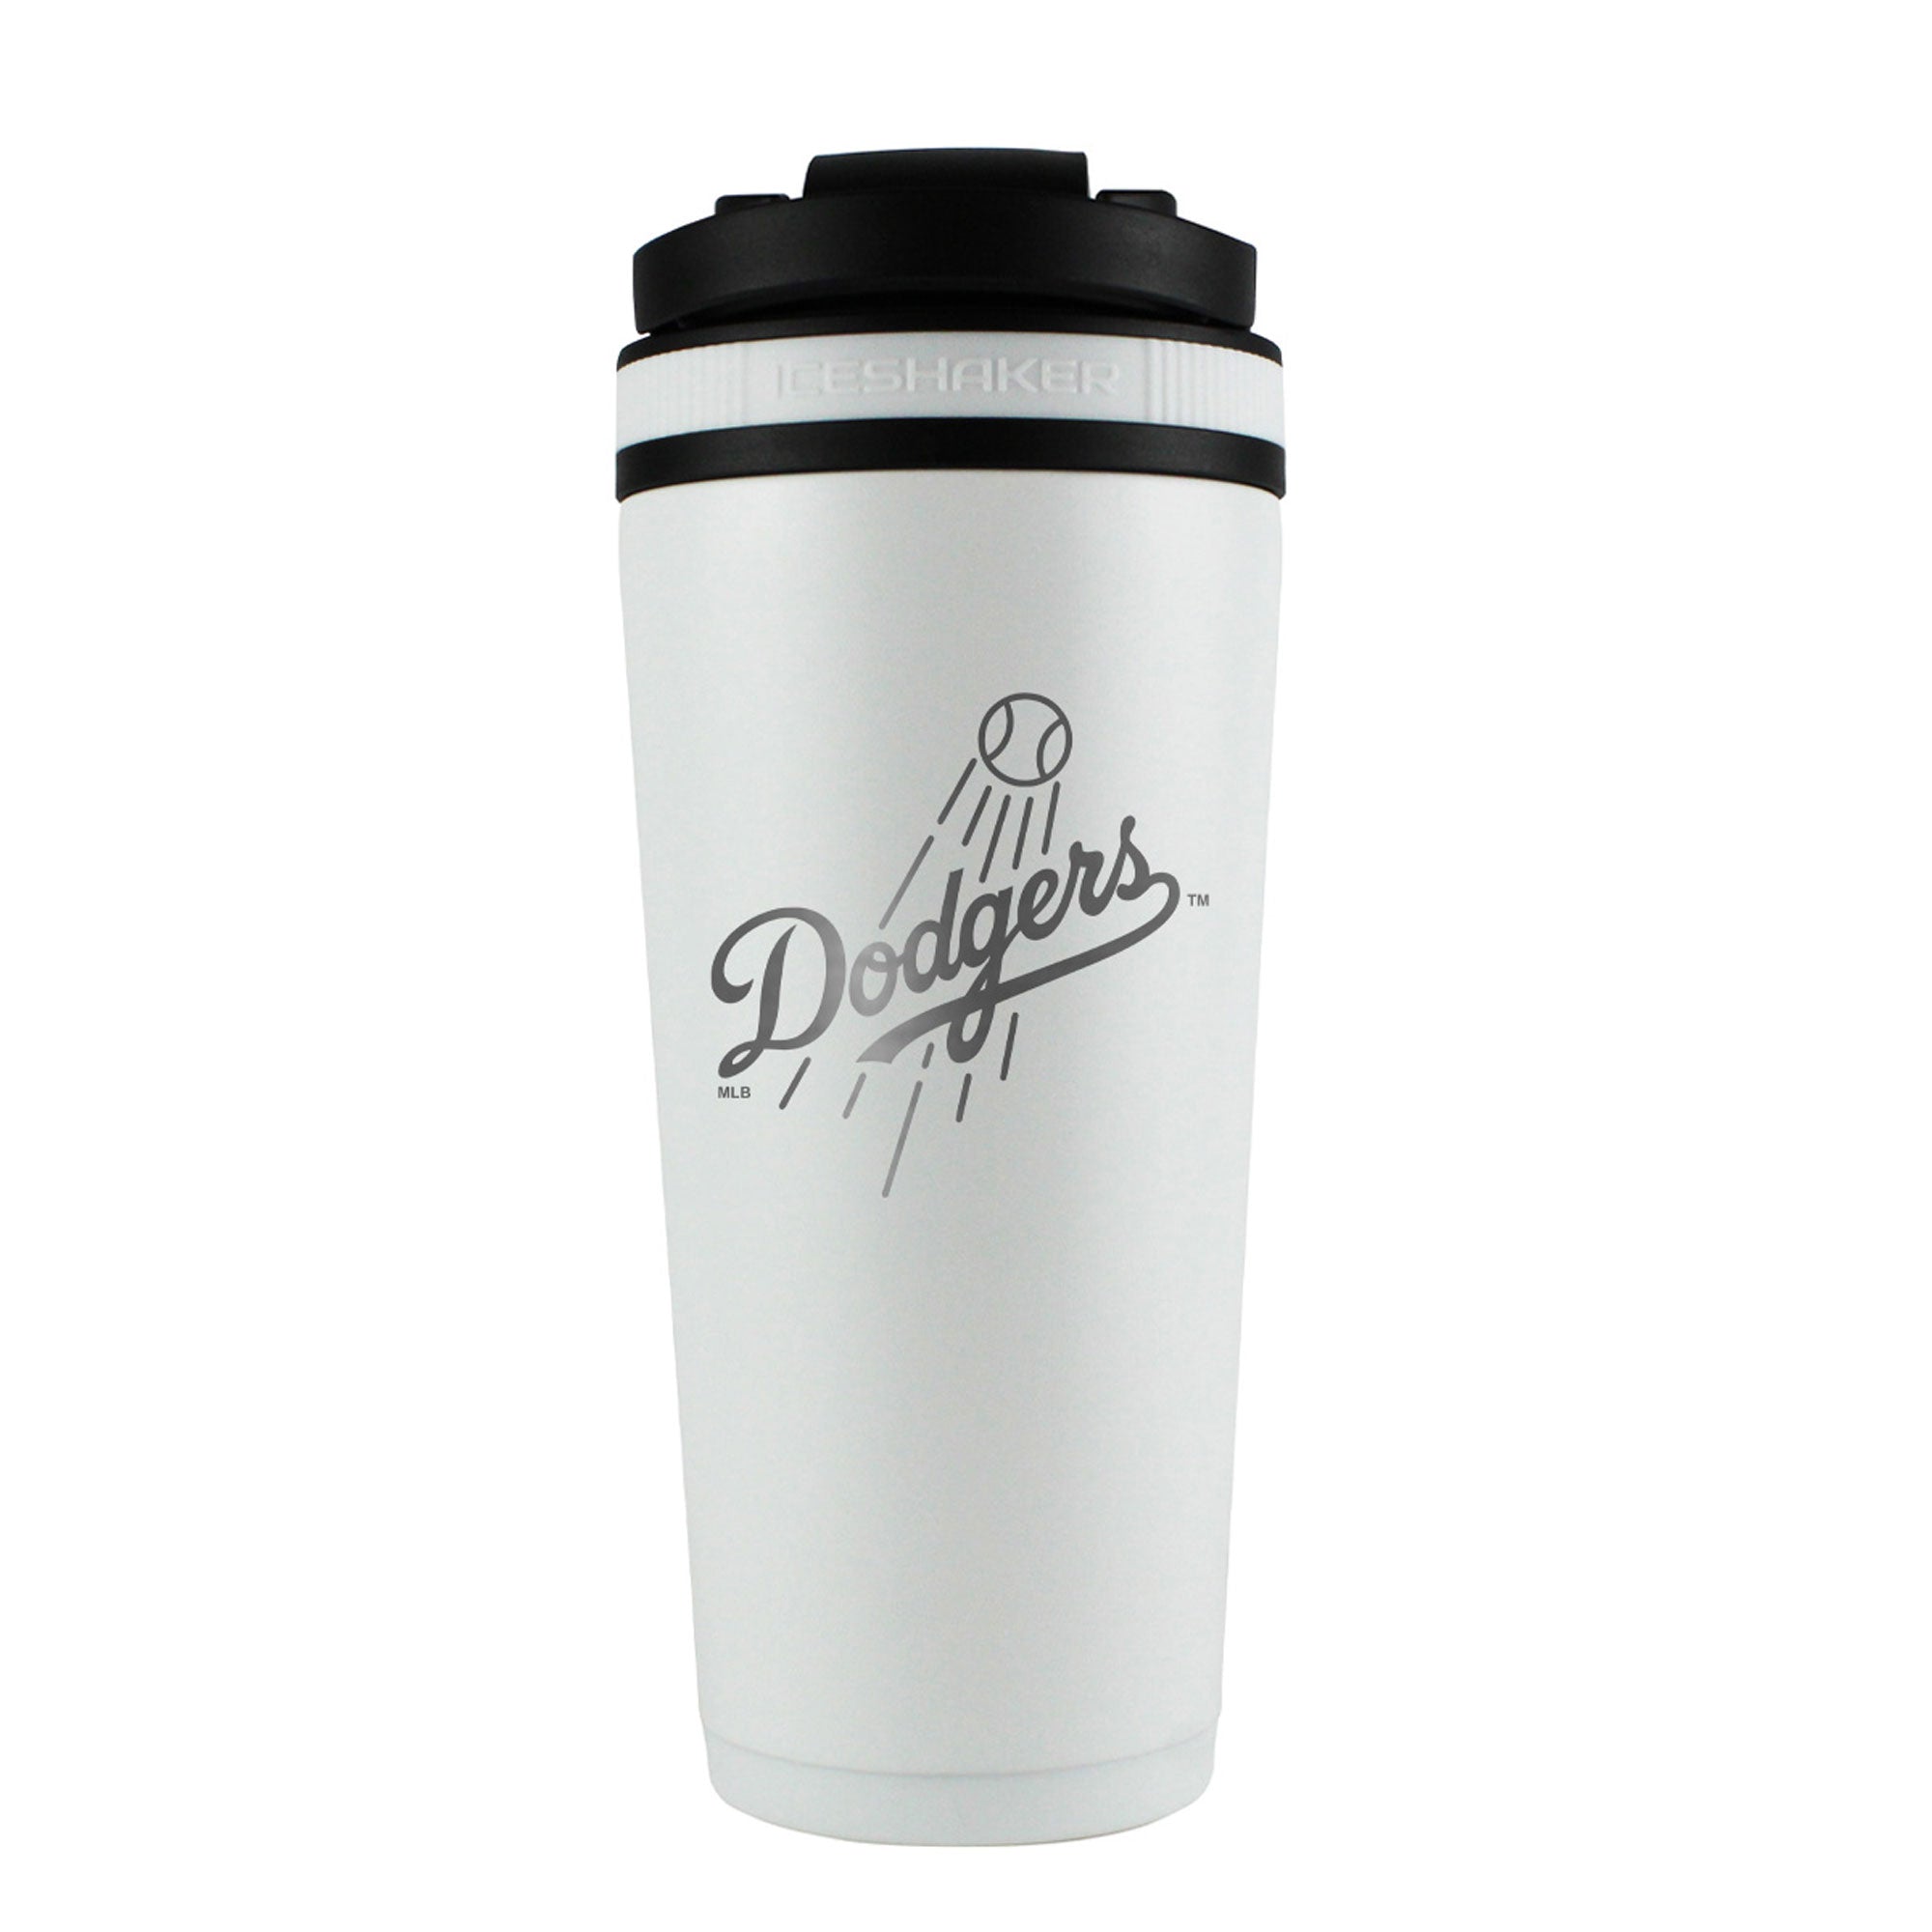 Officially Licensed MLB Los Angeles Dodgers 26oz Ice Shaker